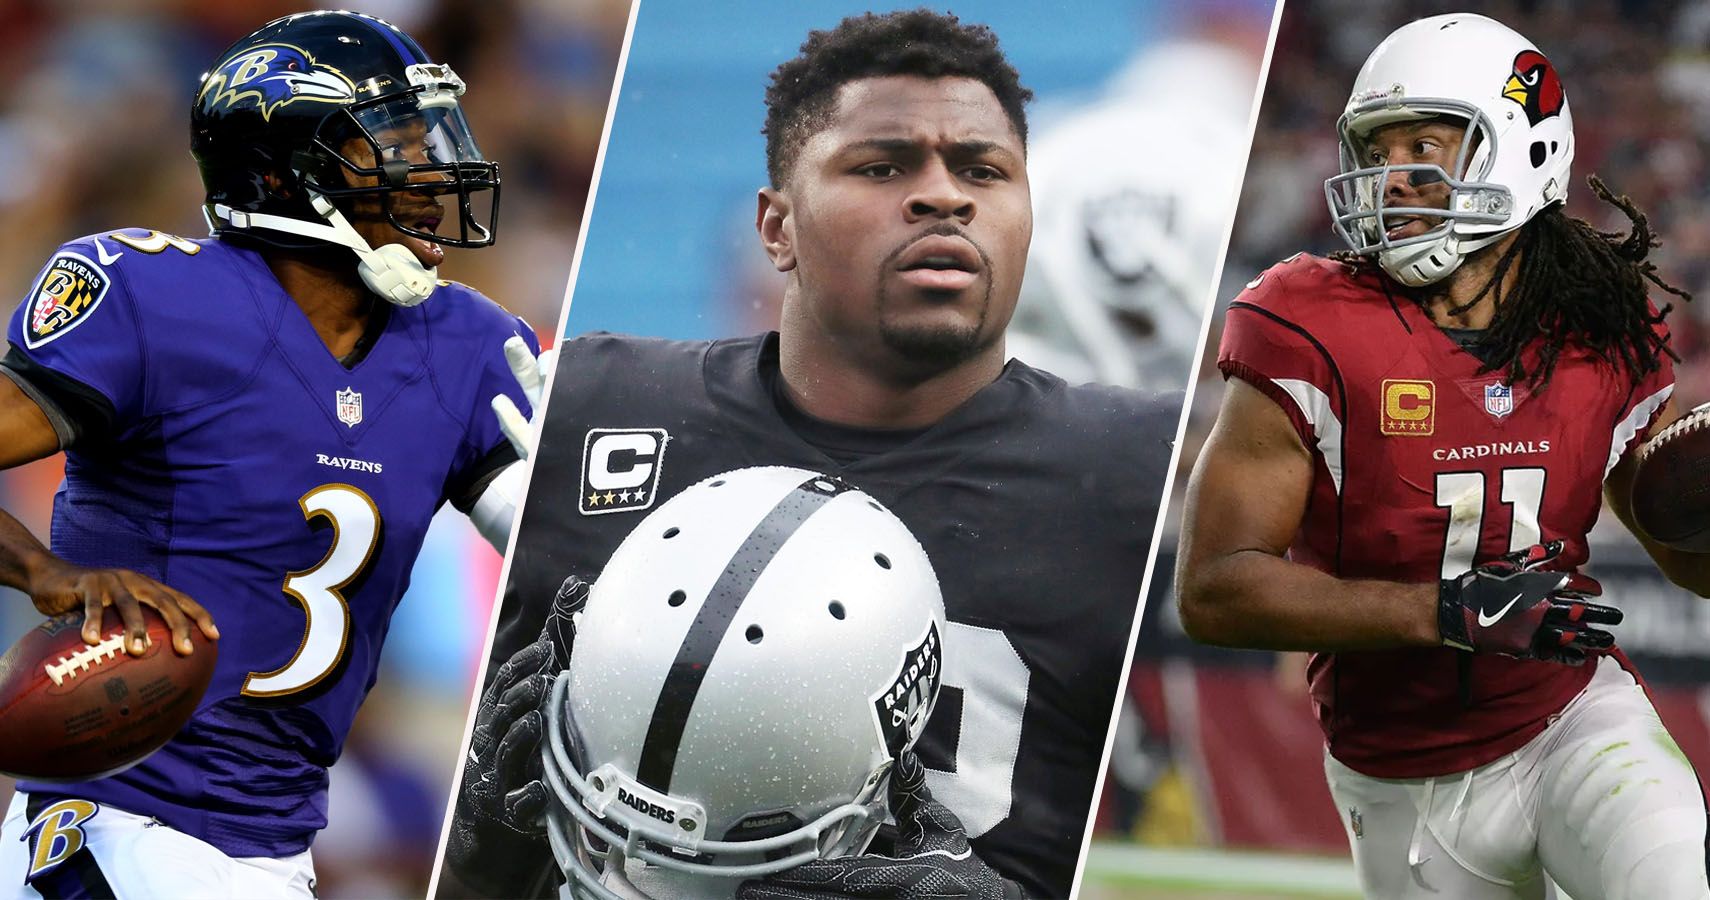 10 NFL Players Who Will Be Cut Before The Regular Season (And 10 Who